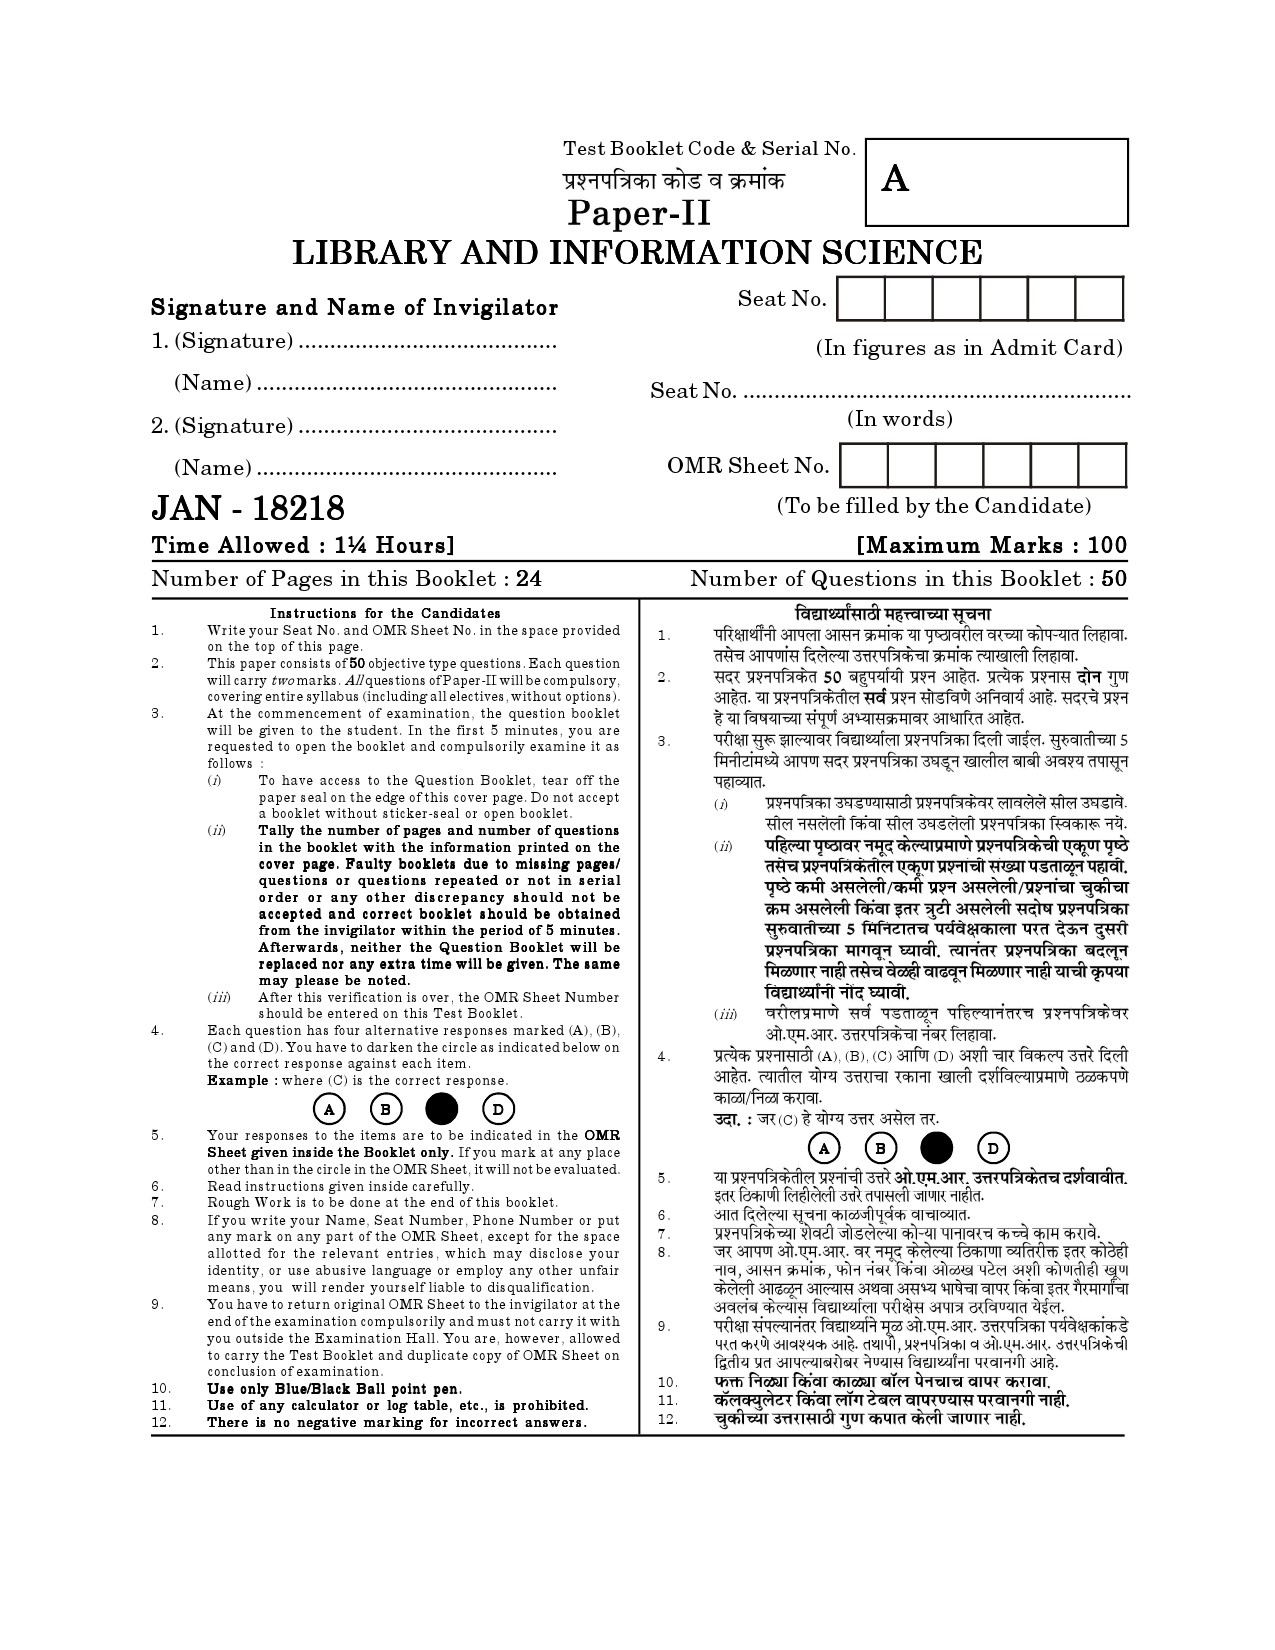 Maharashtra SET Library Information Science Question Paper II January 2018 1